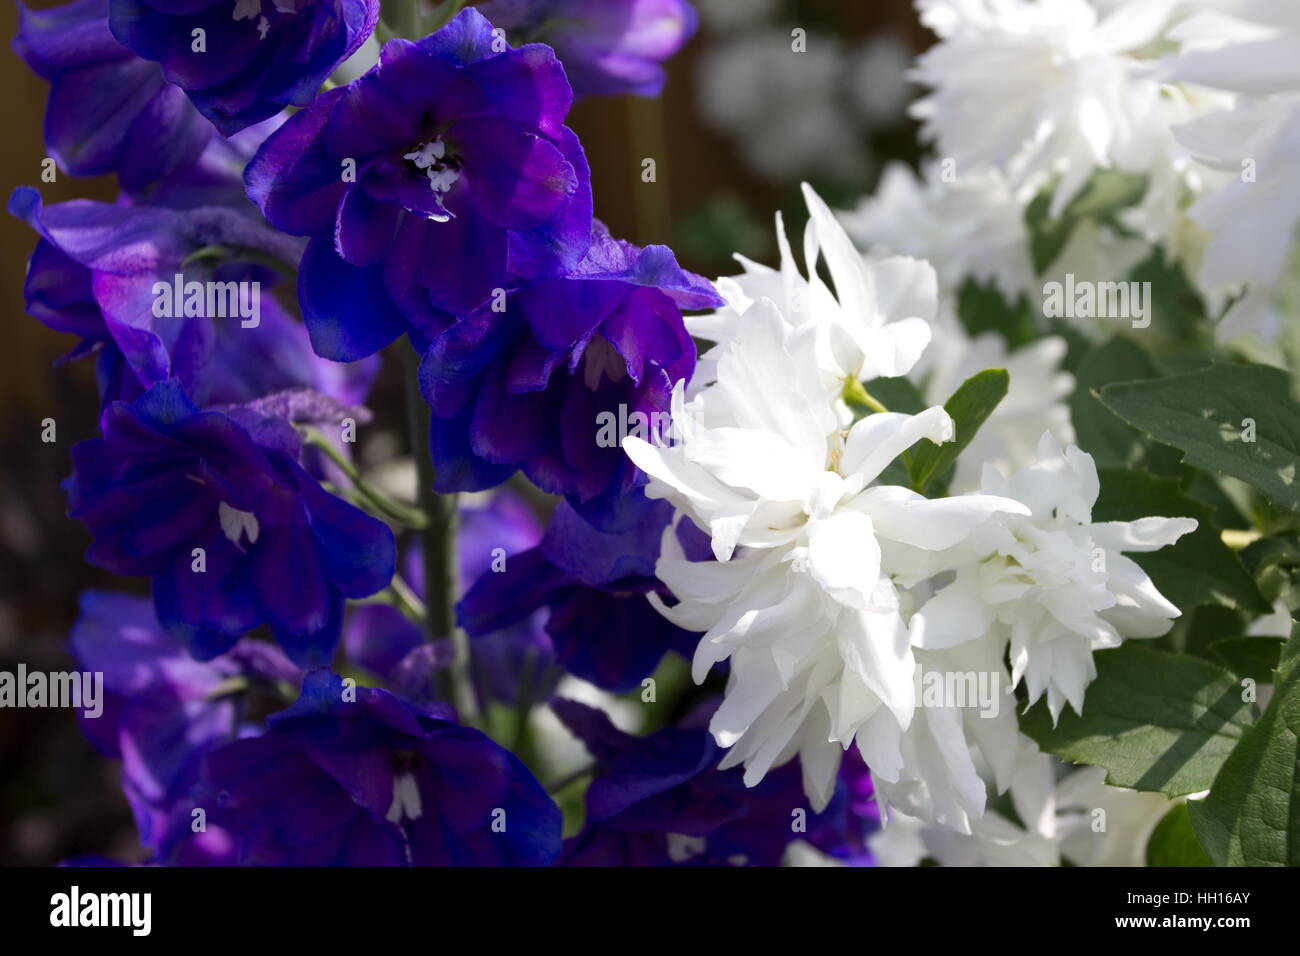 Philadelphus buckley's quill Mock orange White flower with a scent and Delphinium guardian blue Stock Photo